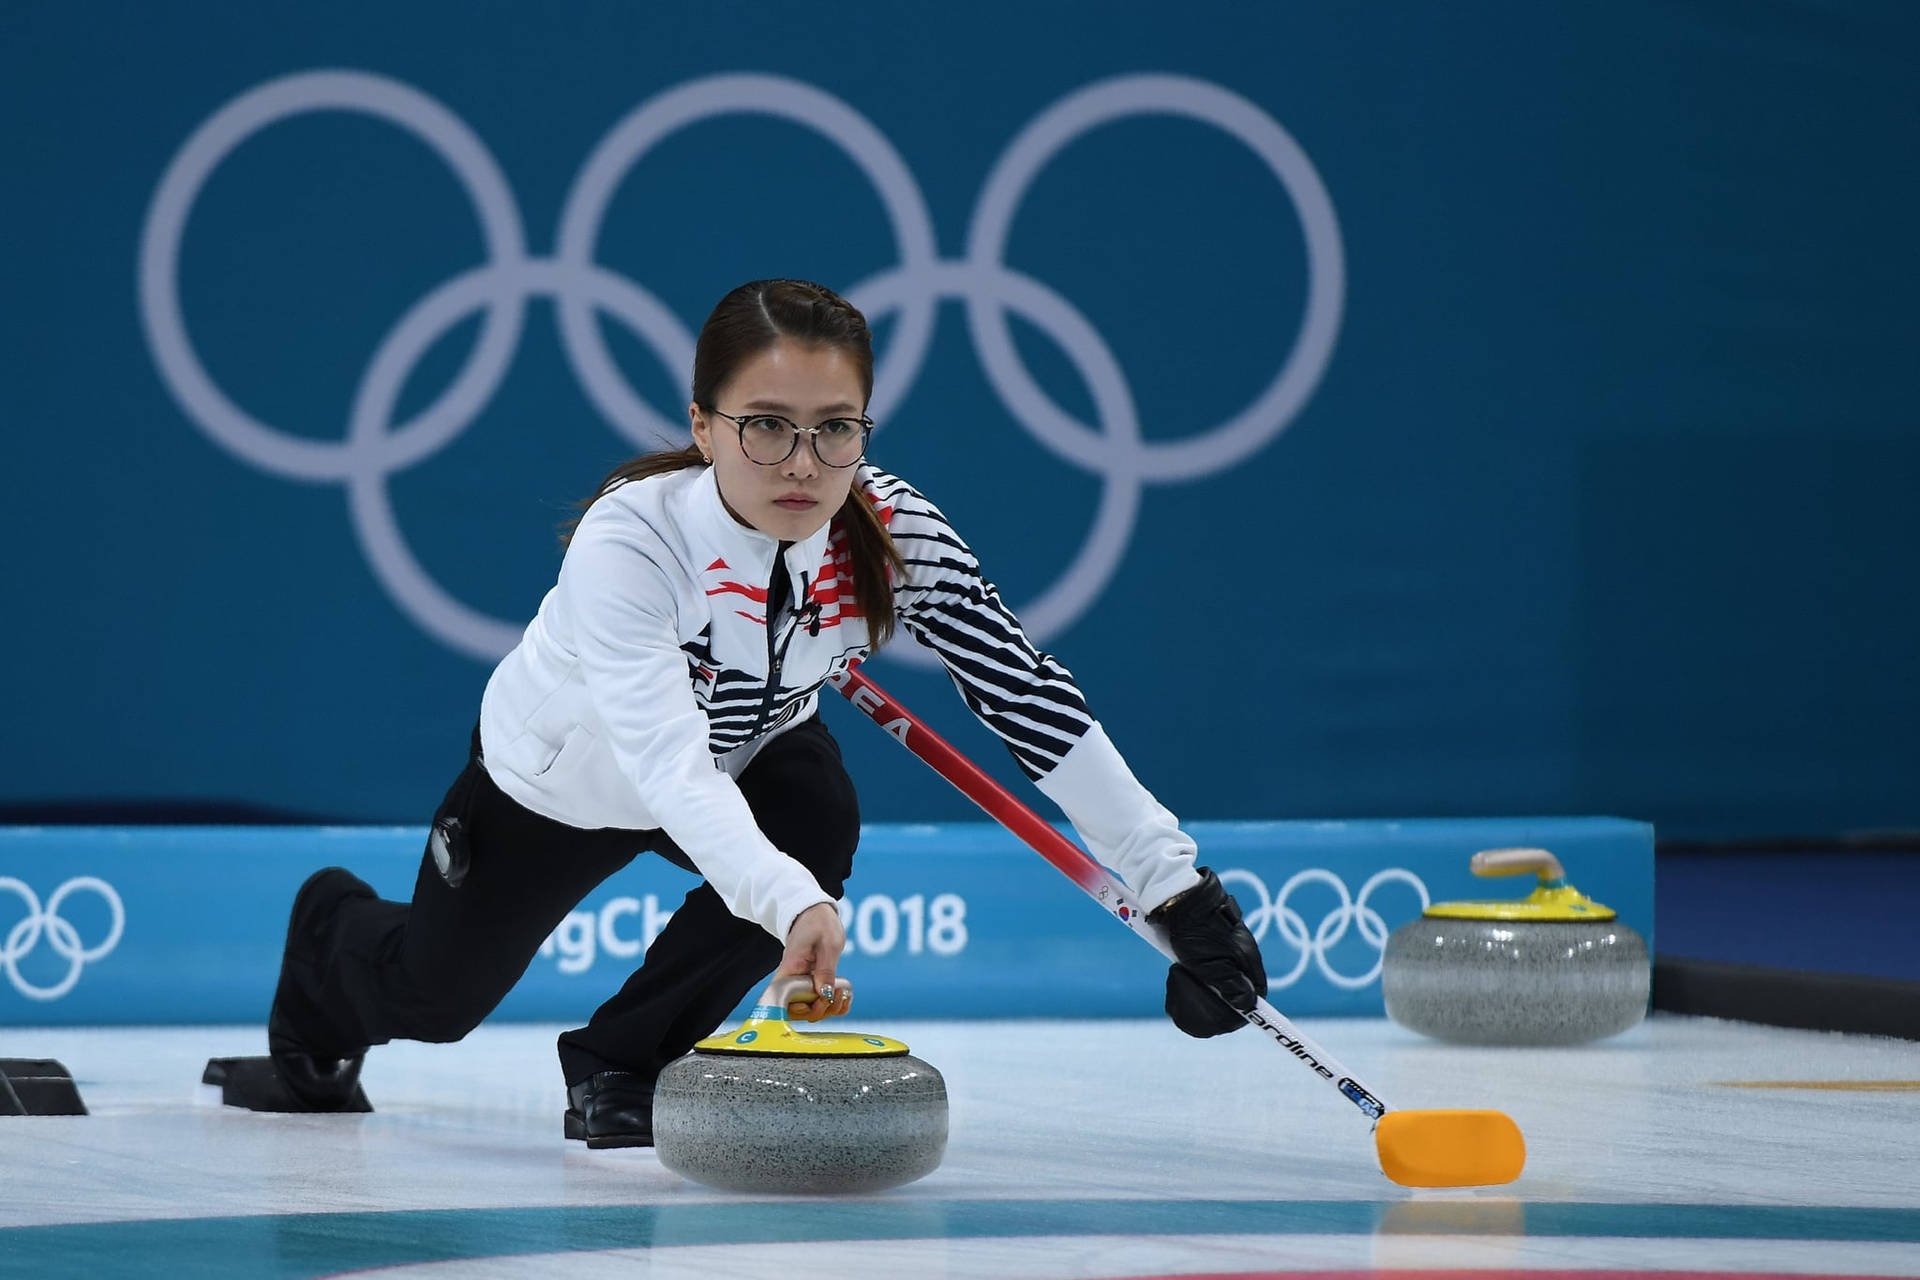 Female Curling Athlete At The Winter Olympics Wallpaper